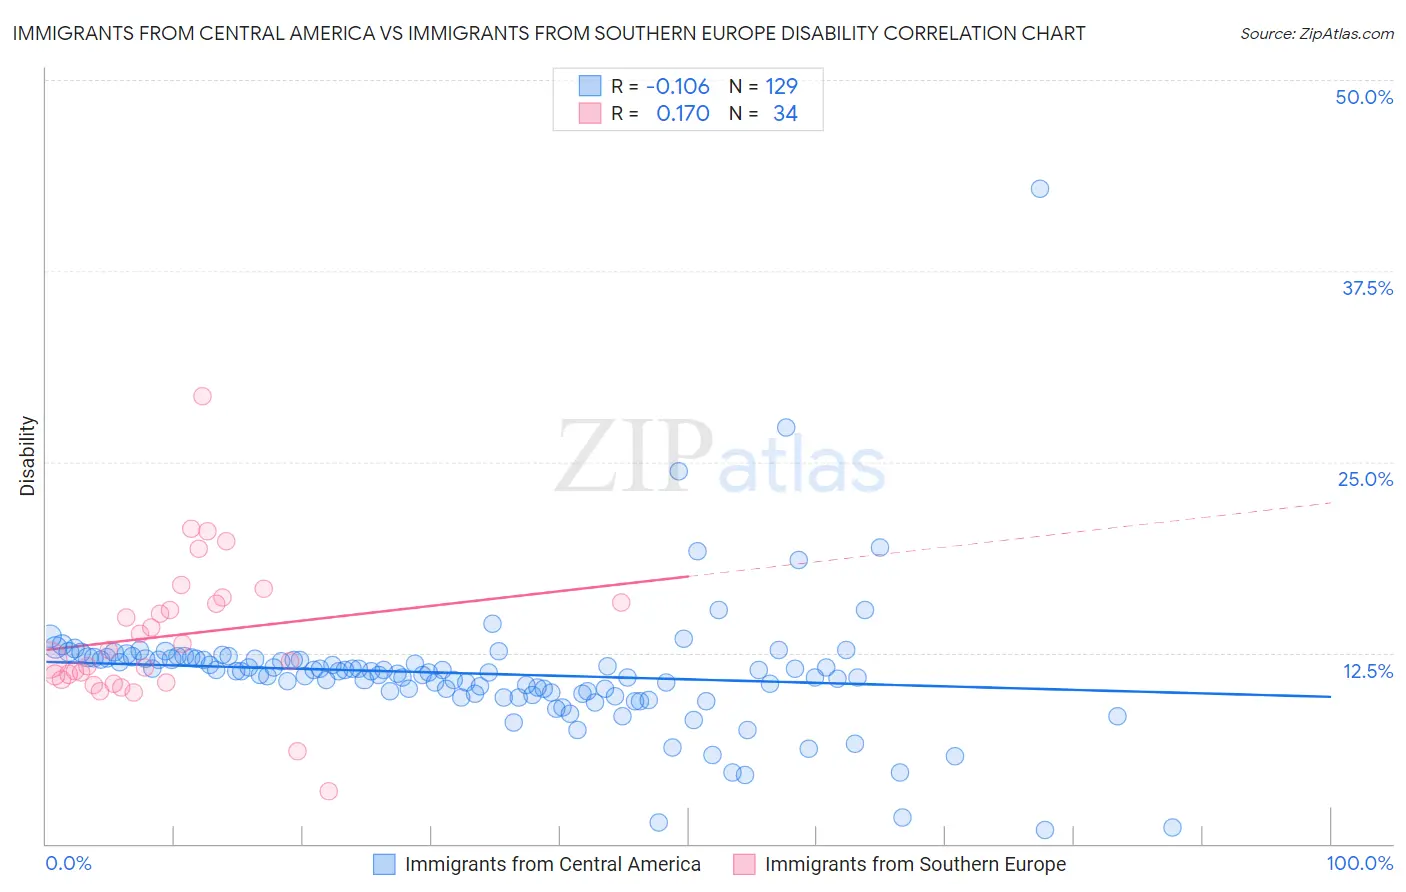 Immigrants from Central America vs Immigrants from Southern Europe Disability